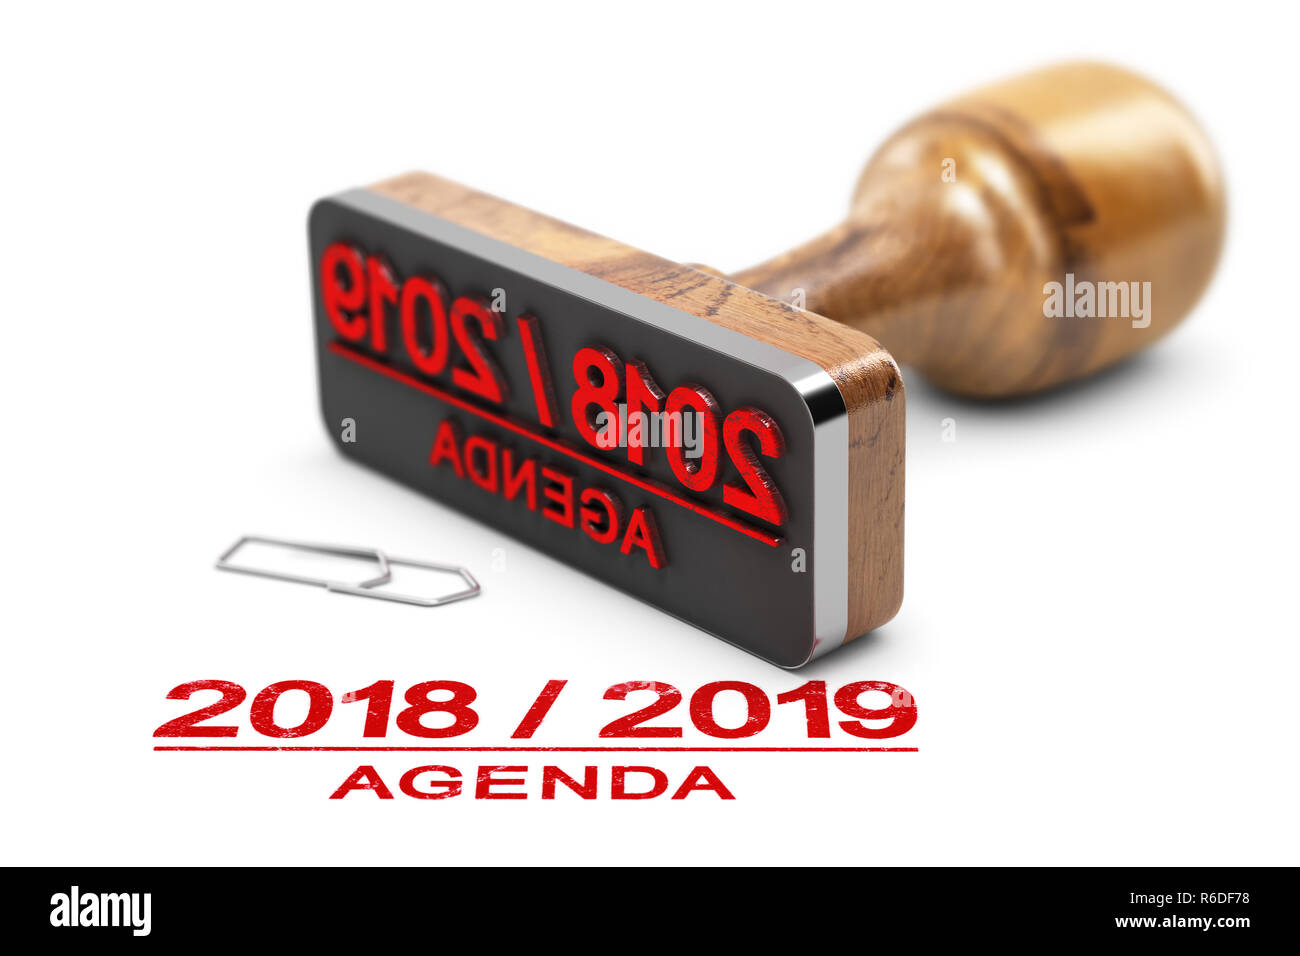 Agenda or Planning 2018 2019 Over White Background Stock Photo